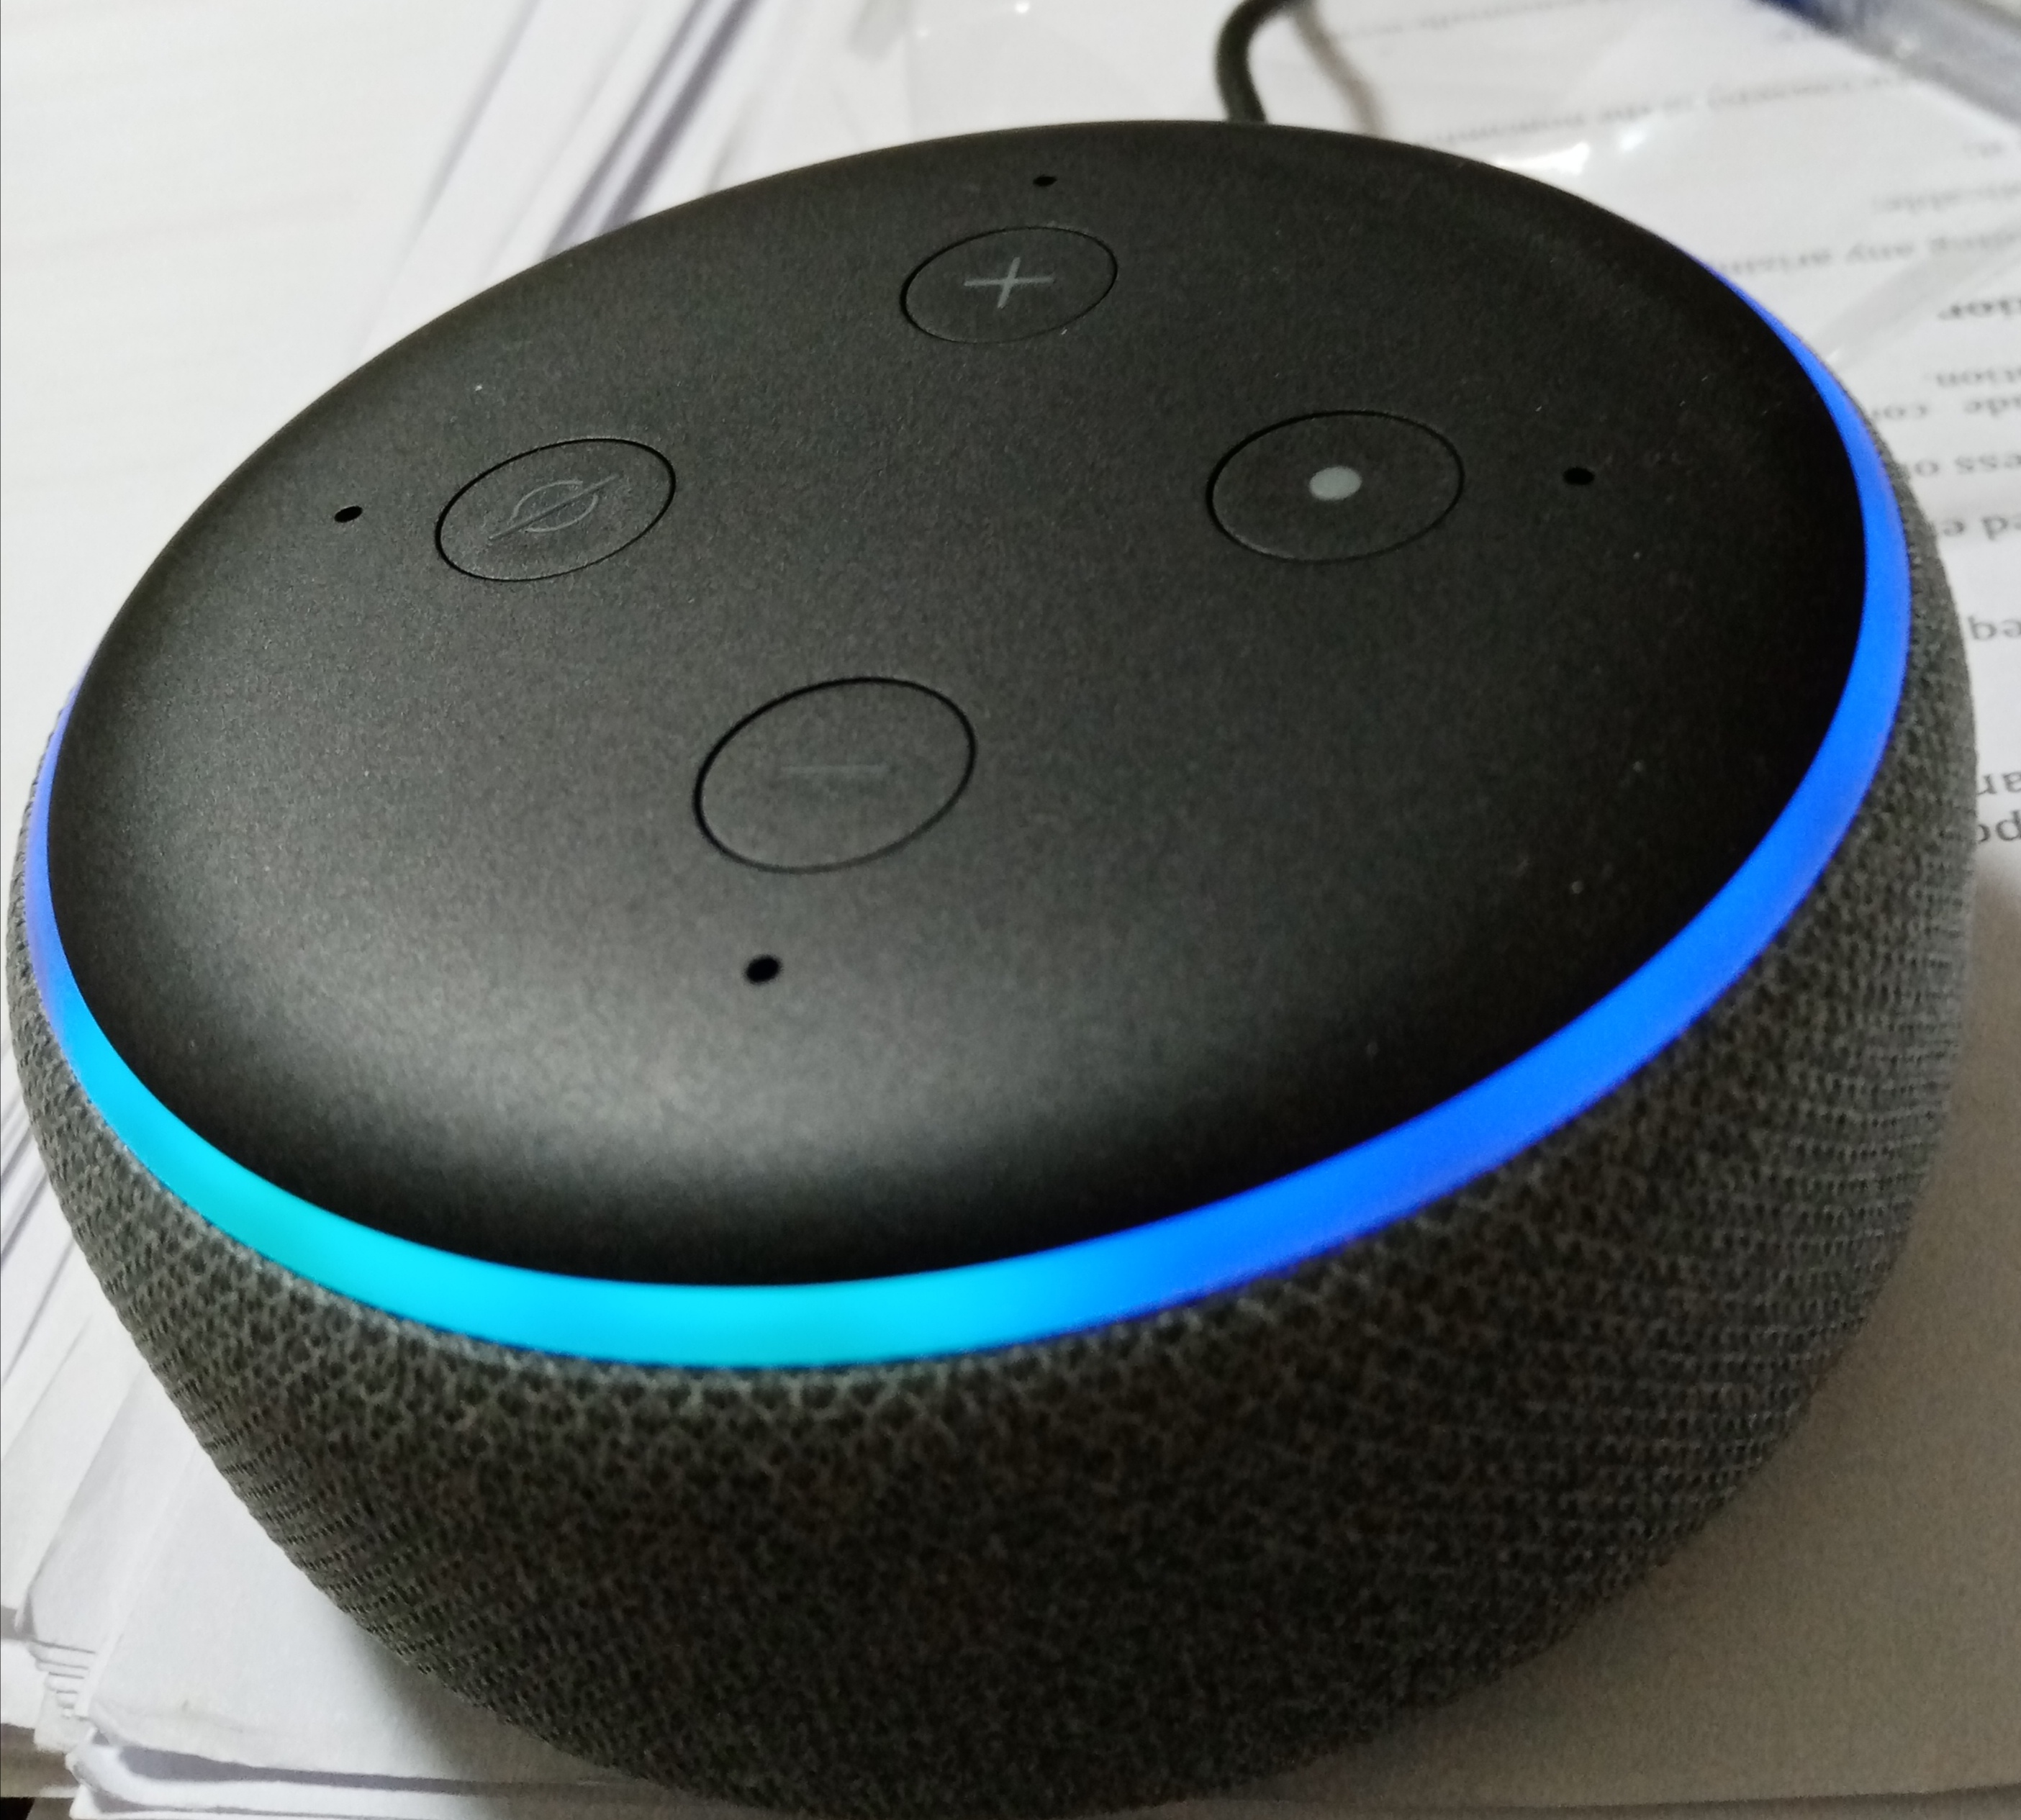 my echo stop responding it is struck with blue light when it receives commands